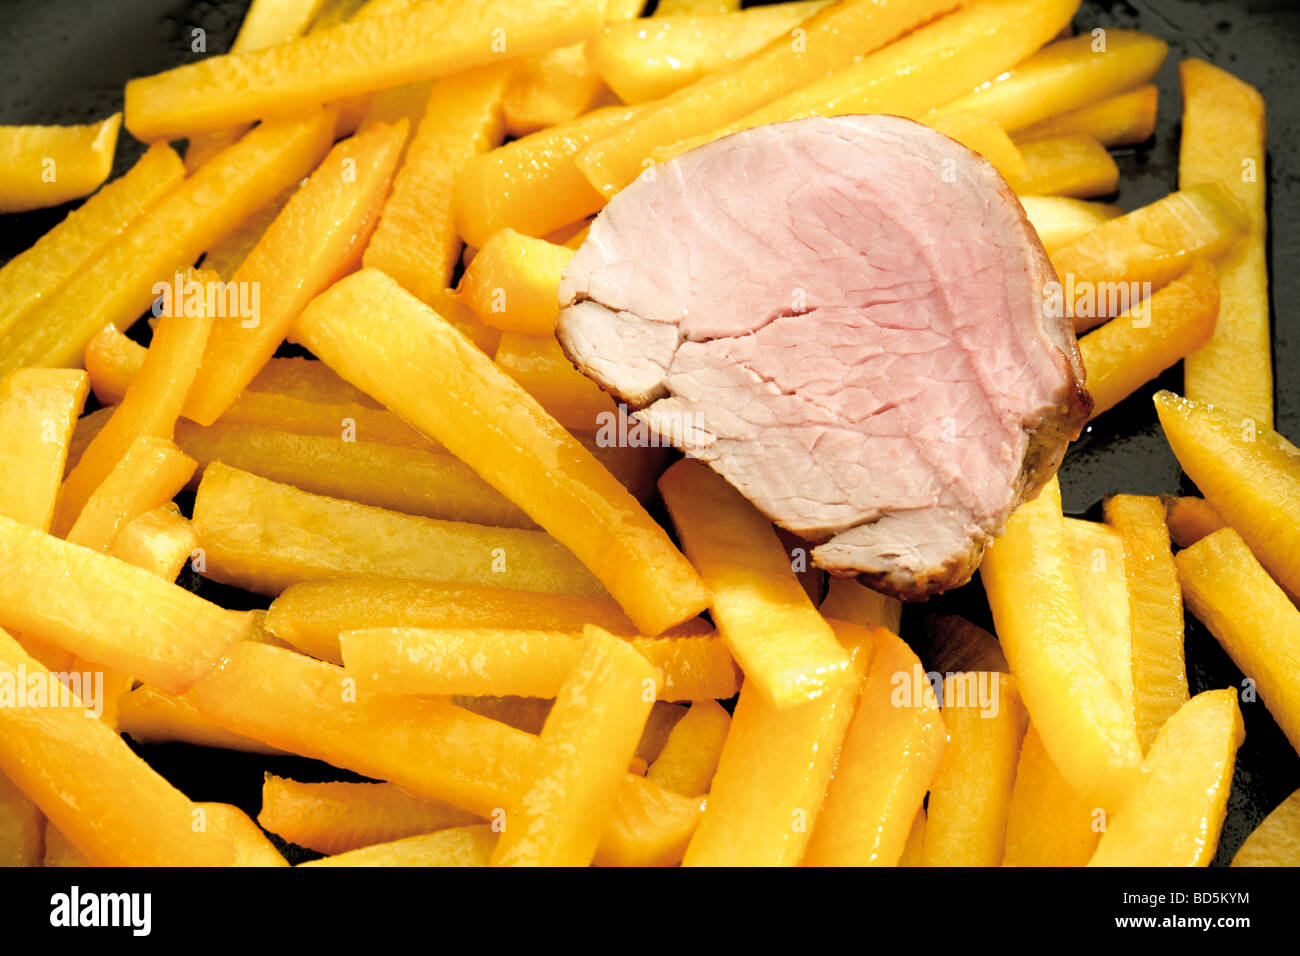 Turnip chips in a pan with a slice of pork fillet Stock Photo